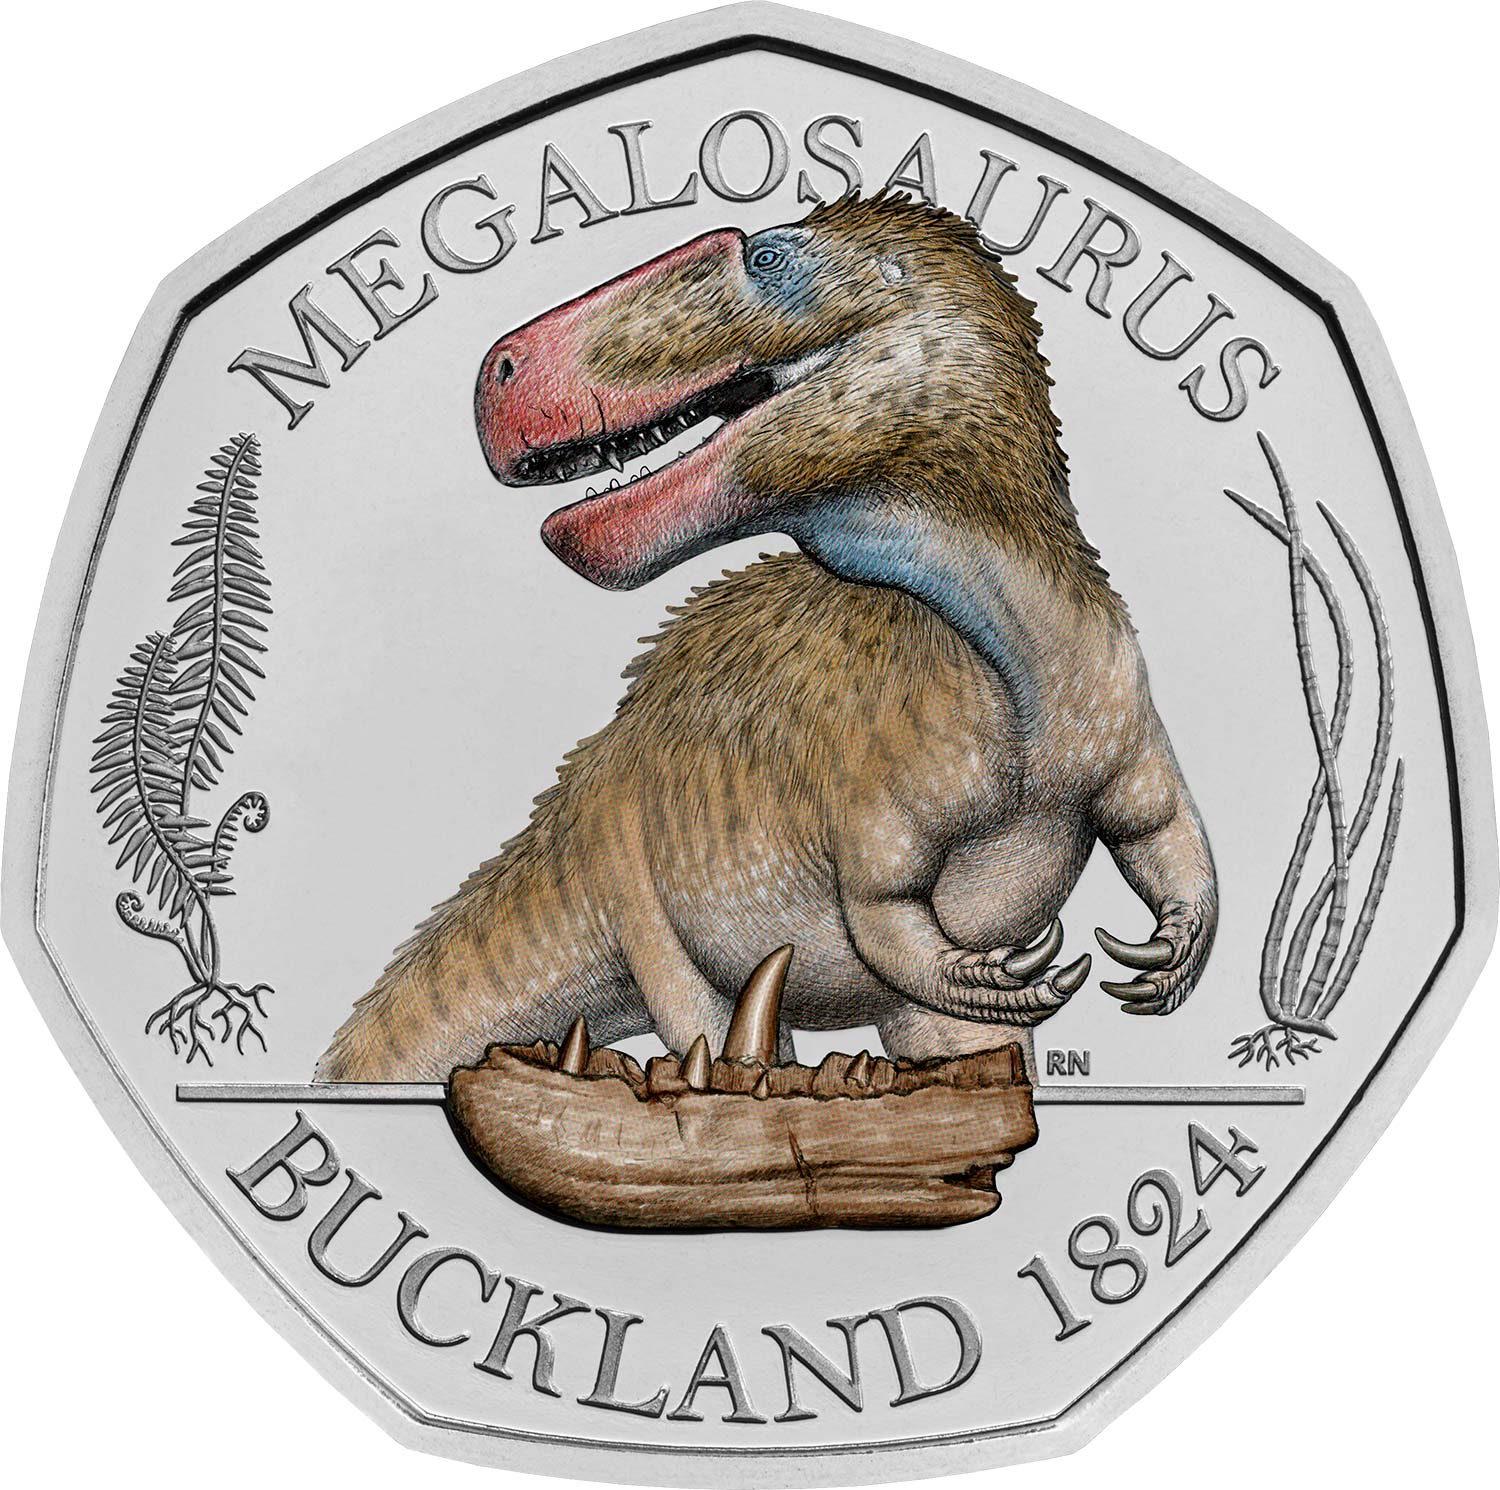 The Dinosauria Collection